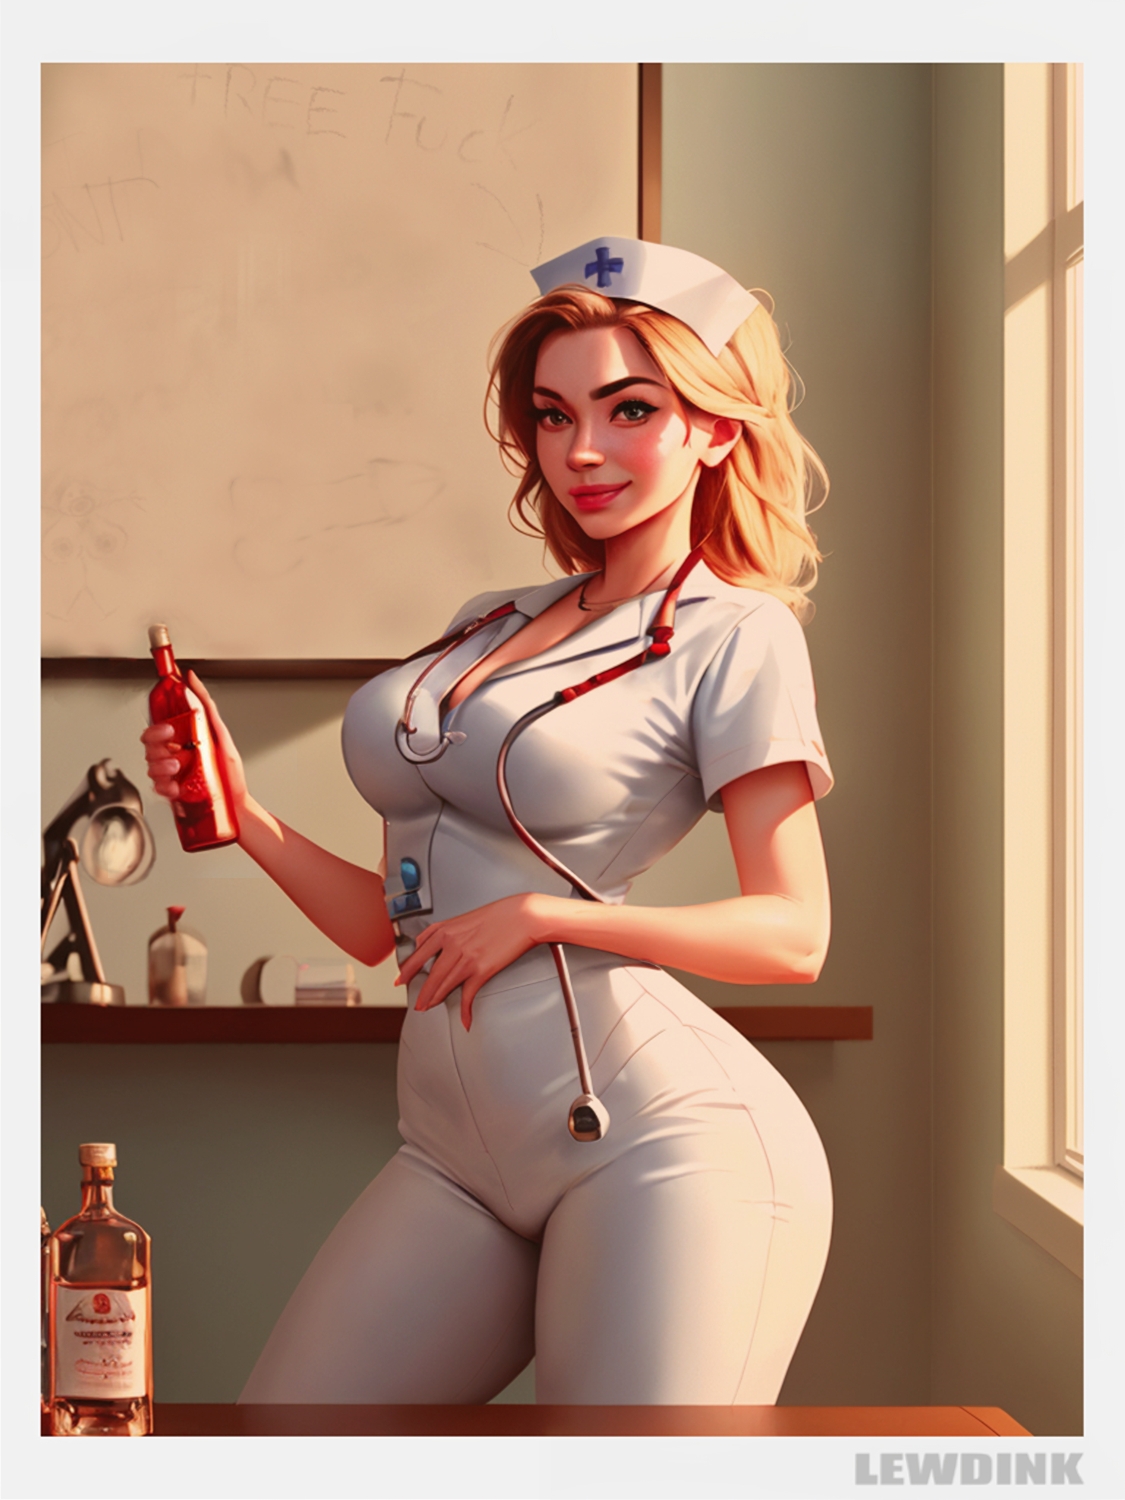 Medical check-up Mercy Muscular Girl 3d Porn 3d Girl 3dnsfw 3dxgirls Abs Sexy Hot Bimbo Huge Boobs Huge Tits Muscles Musclegirl Pinup Perfect Body Fuck Hard Sexyhot Sexy Ass Sexy Woman Fake Tits Lips Latex Flexible Smirking Big Tits Huge Ass Big Booty Booty Fit Fitness Thicc Mom Milf Mature Mature Woman Spread Legs Spread Thick Thighs Horny Face Short Hair Hardcore Curvy Big Ass Big boobs Big Breasts Big Butt Brown Eyes Cleavage Fishnet Stockings Fishnet Nipple Piercing Piercing Belly Button Piercing Leather Jacket Thighs Jewels Pawg Ass Red head Tribal Weapon Armor Nude Boobs Pregnant Big Balls Big Nipples Lingerie Sexy Lingerie Womb Tattoo Face Tattoo Slut Whore Bitch Comic Hotpants Shorts Long Hair Smile Blonde Nurse